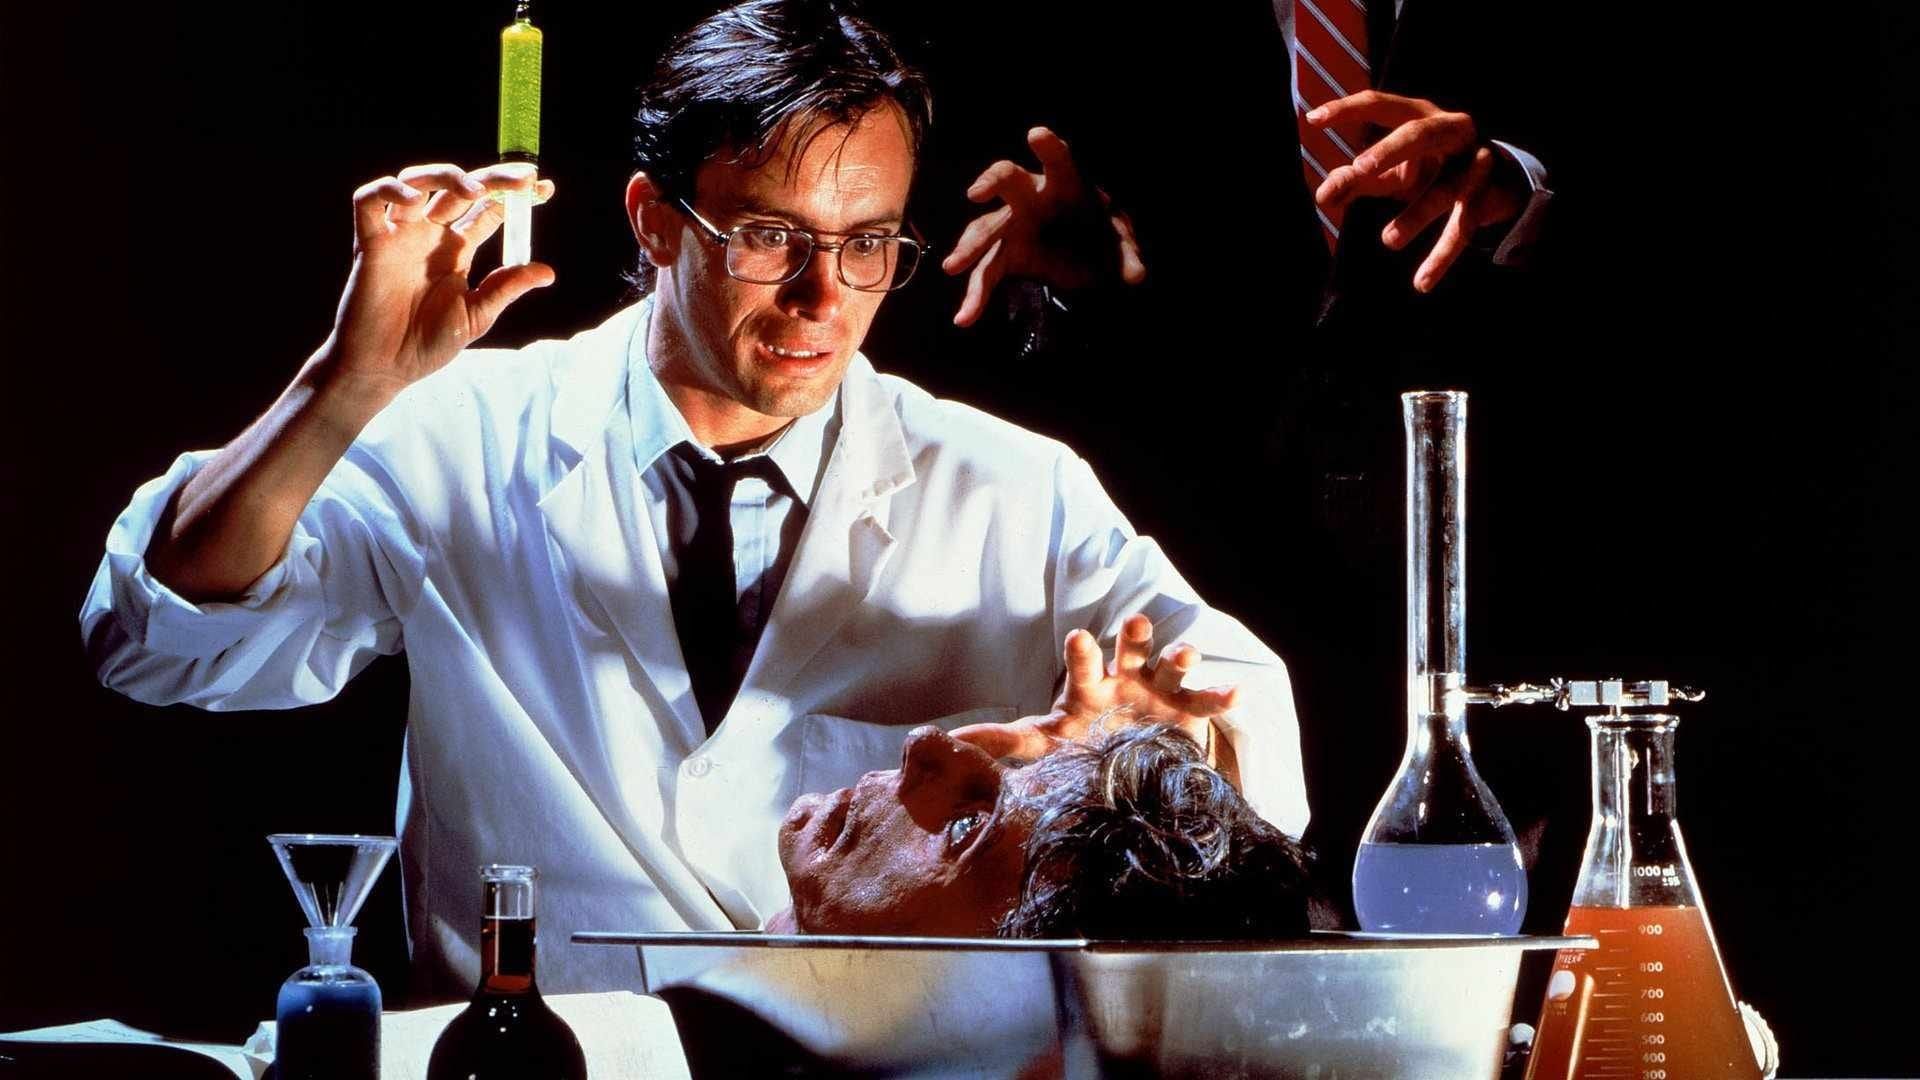 Re-Animator (1985) - Watch on Shudder, Kanopy, Full Moon, Tubi, and  Streaming Online | Reelgood